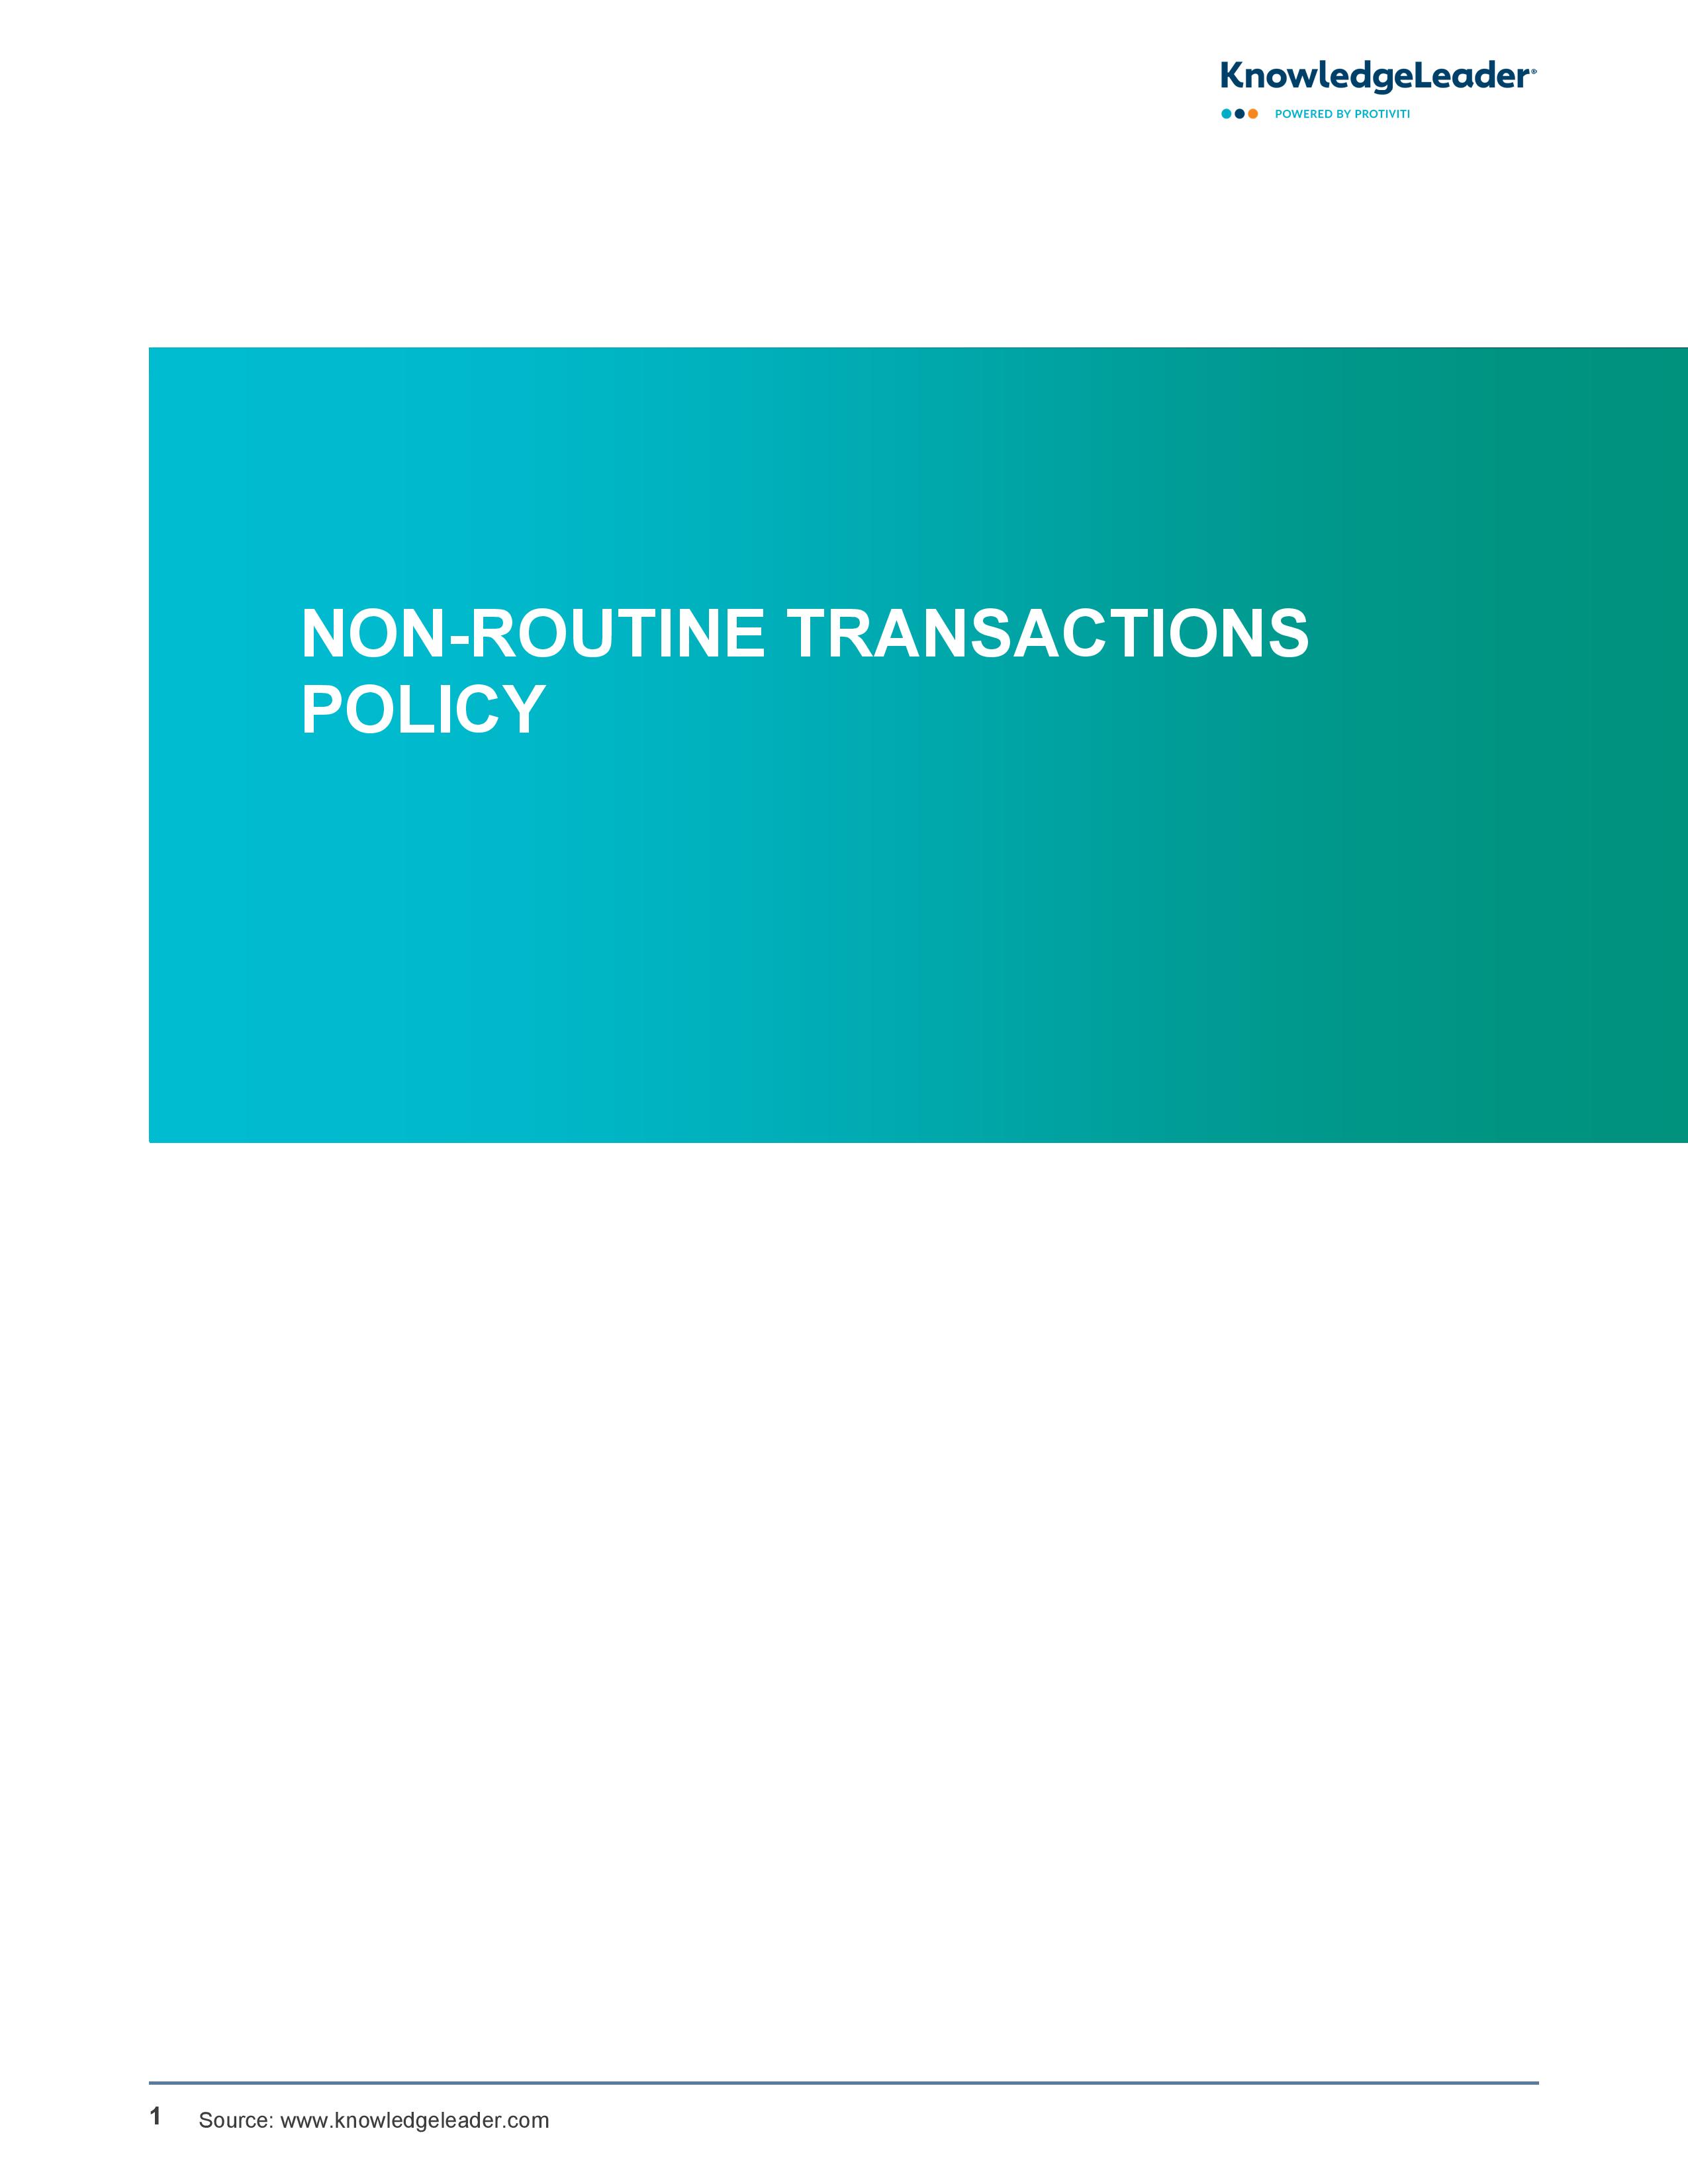 screenshot of the first page of Non-Routine Transactions Policy